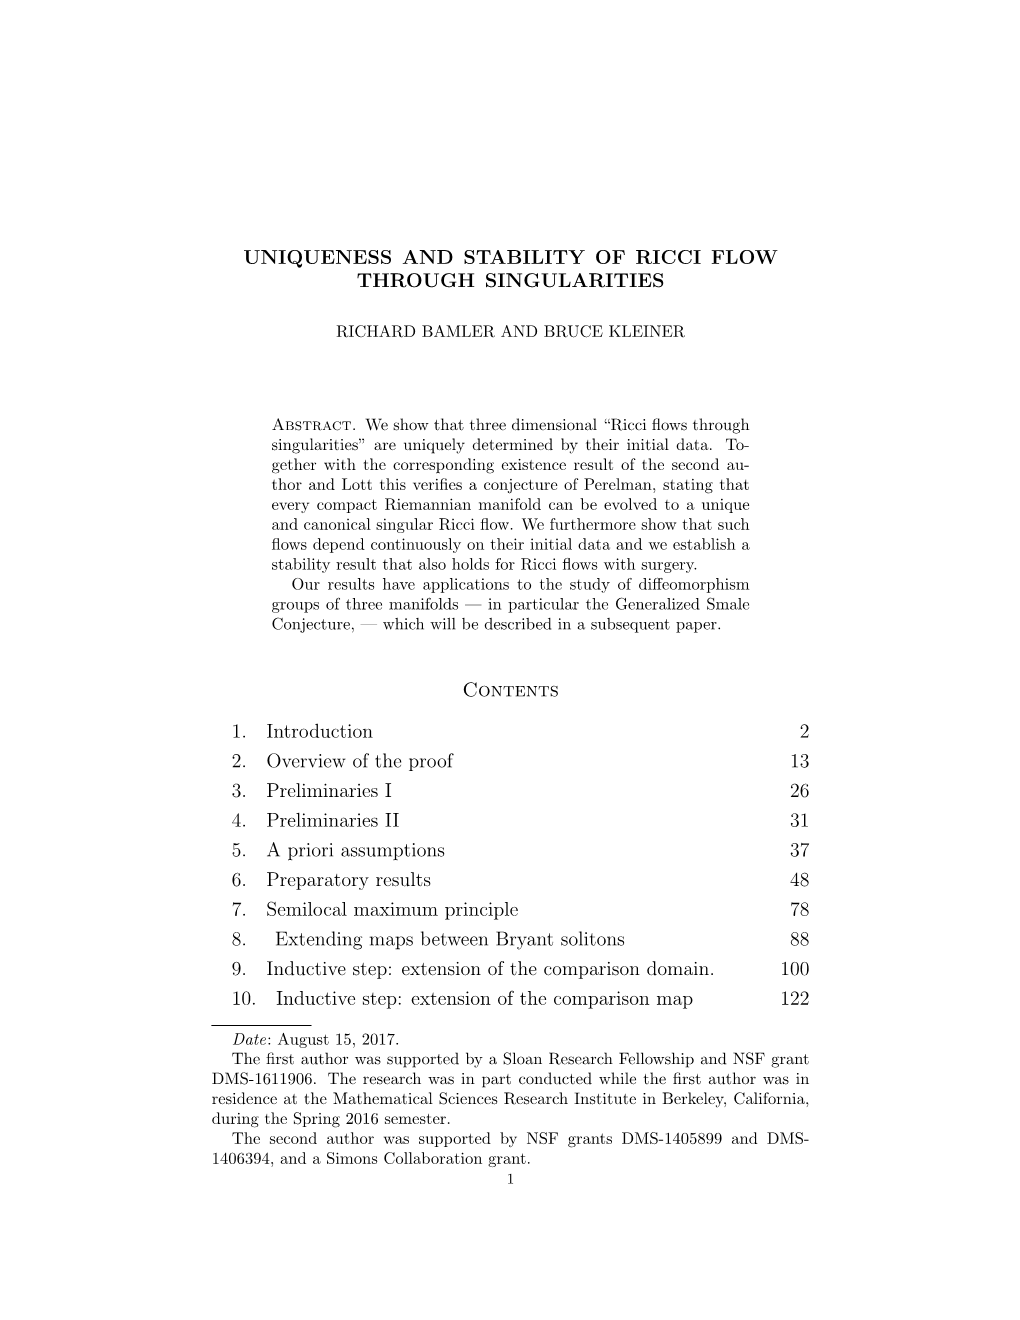 Uniqueness and Stability of Ricci Flow Through Singularities